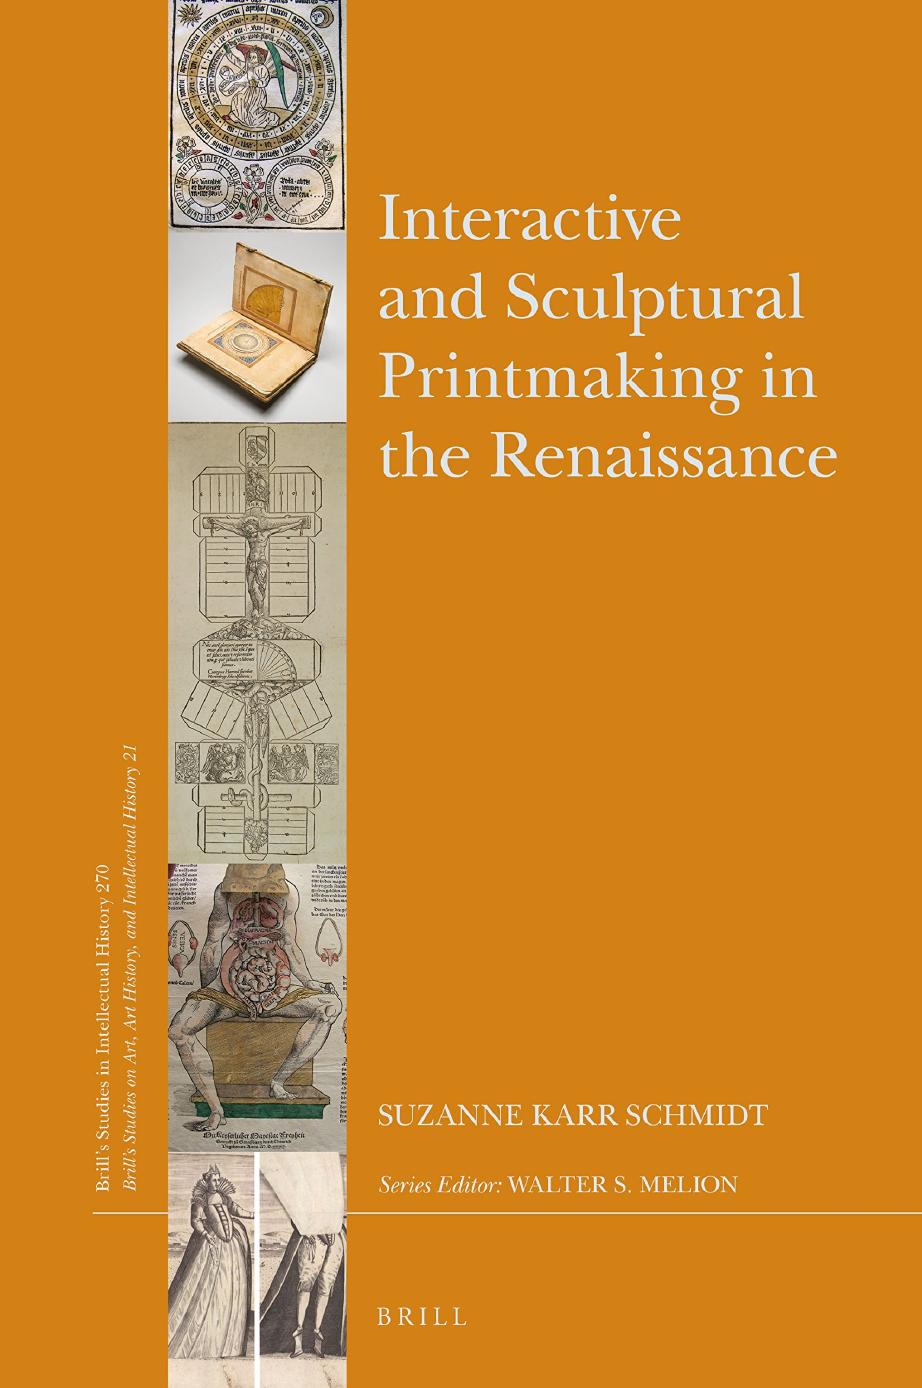 Interactive and Sculptural Printmaking in the Renaissance by Suzanne Karr Schmidt